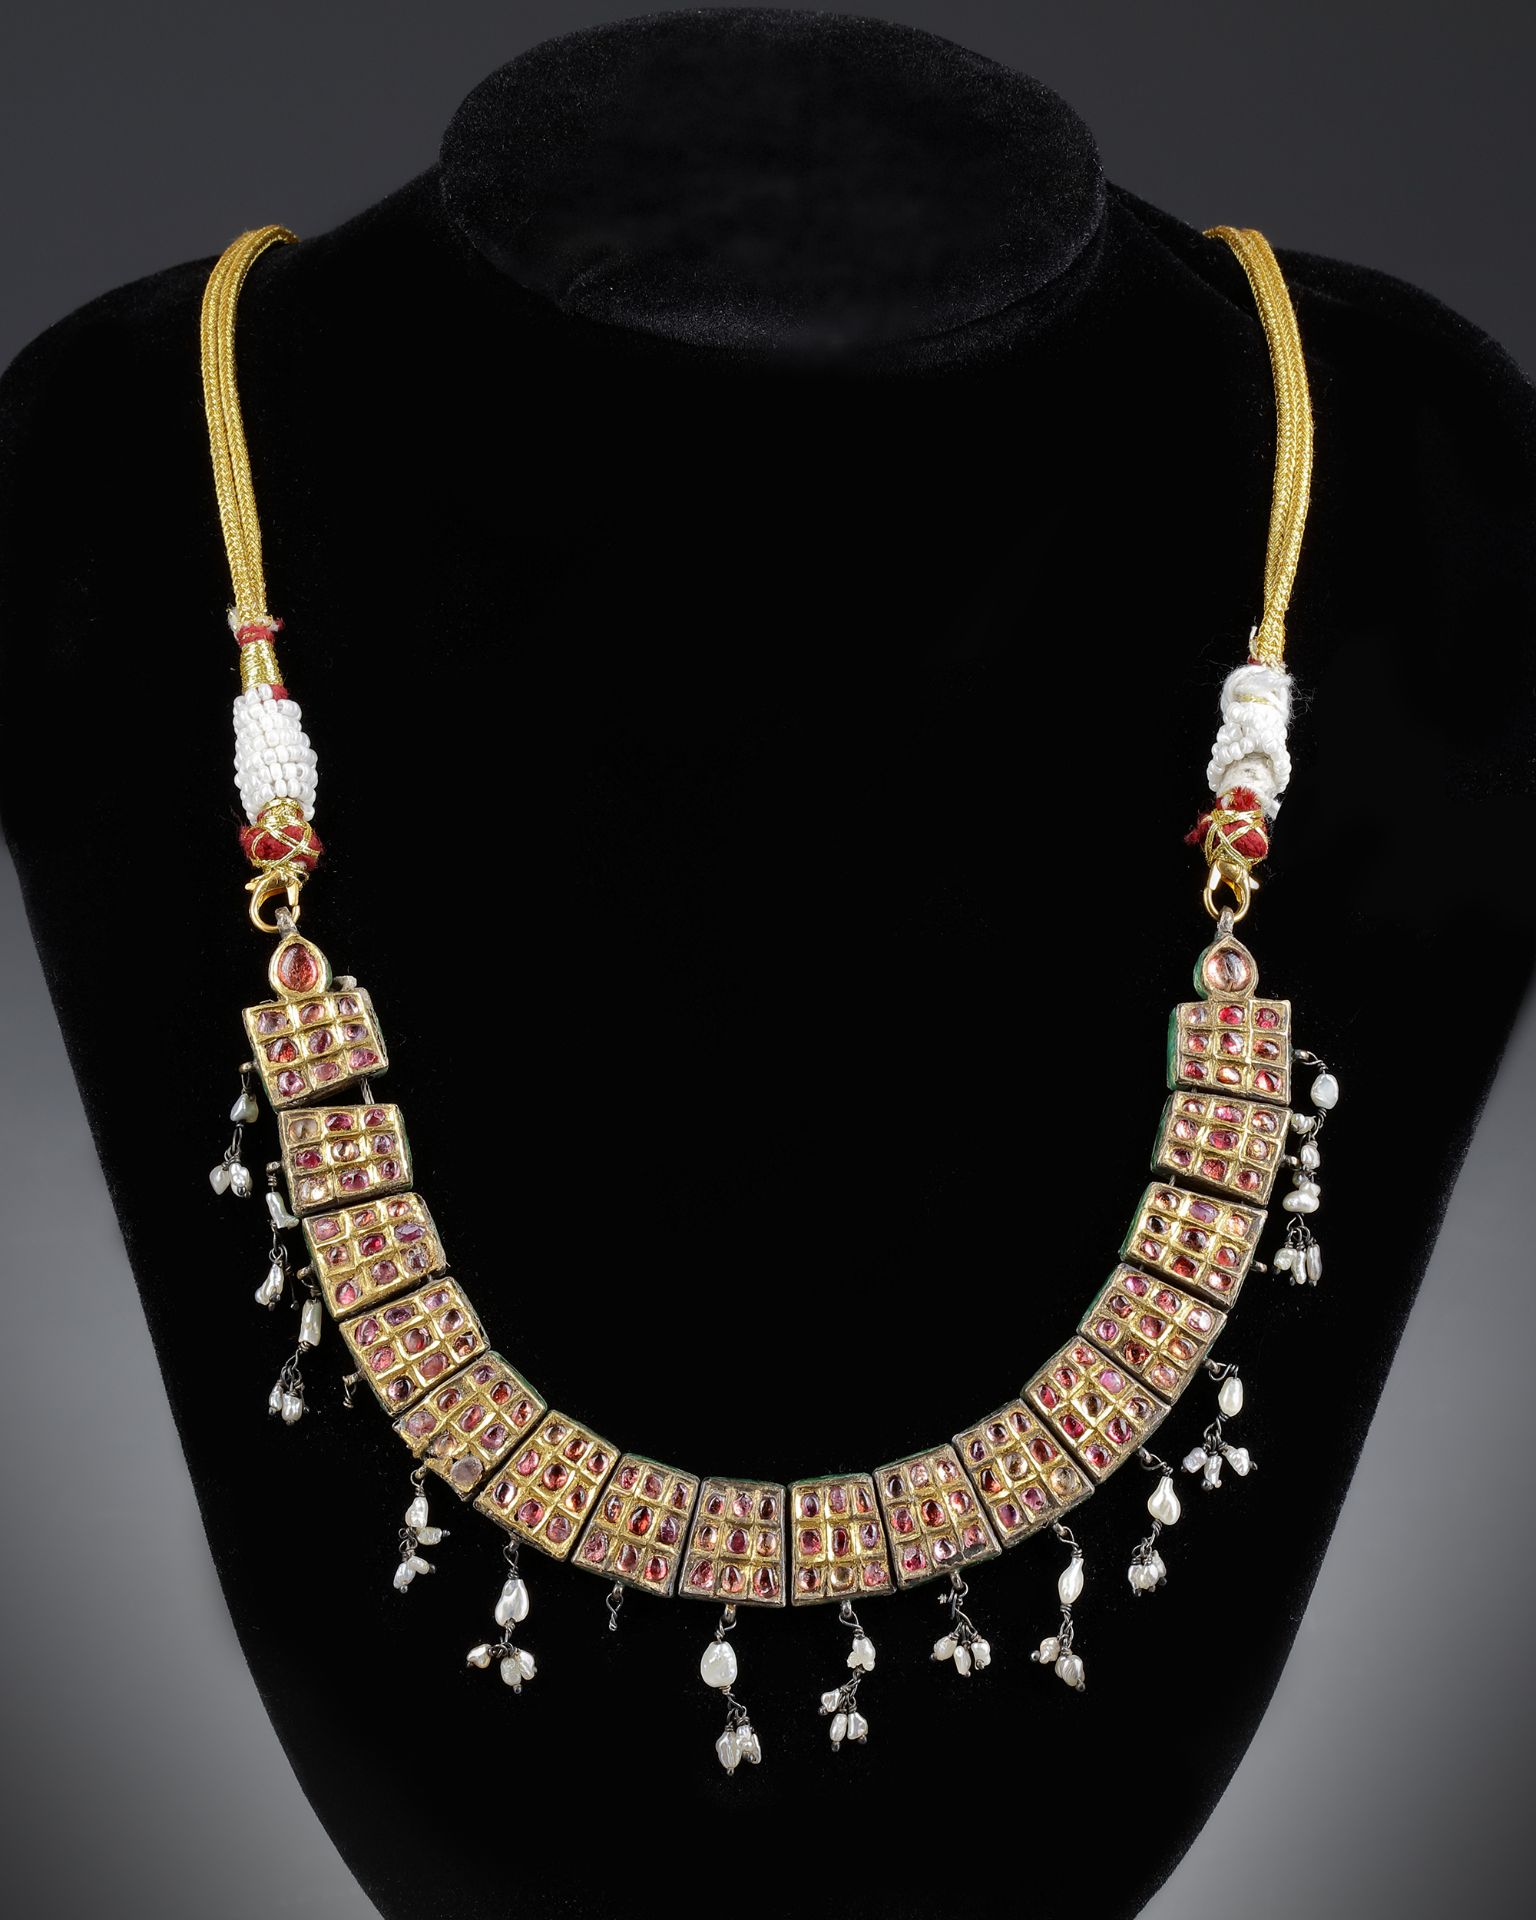 A MUGHAL GEM-SET ENAMELED GOLD NECKLACE, LATE 18TH CENTURY - Image 5 of 6